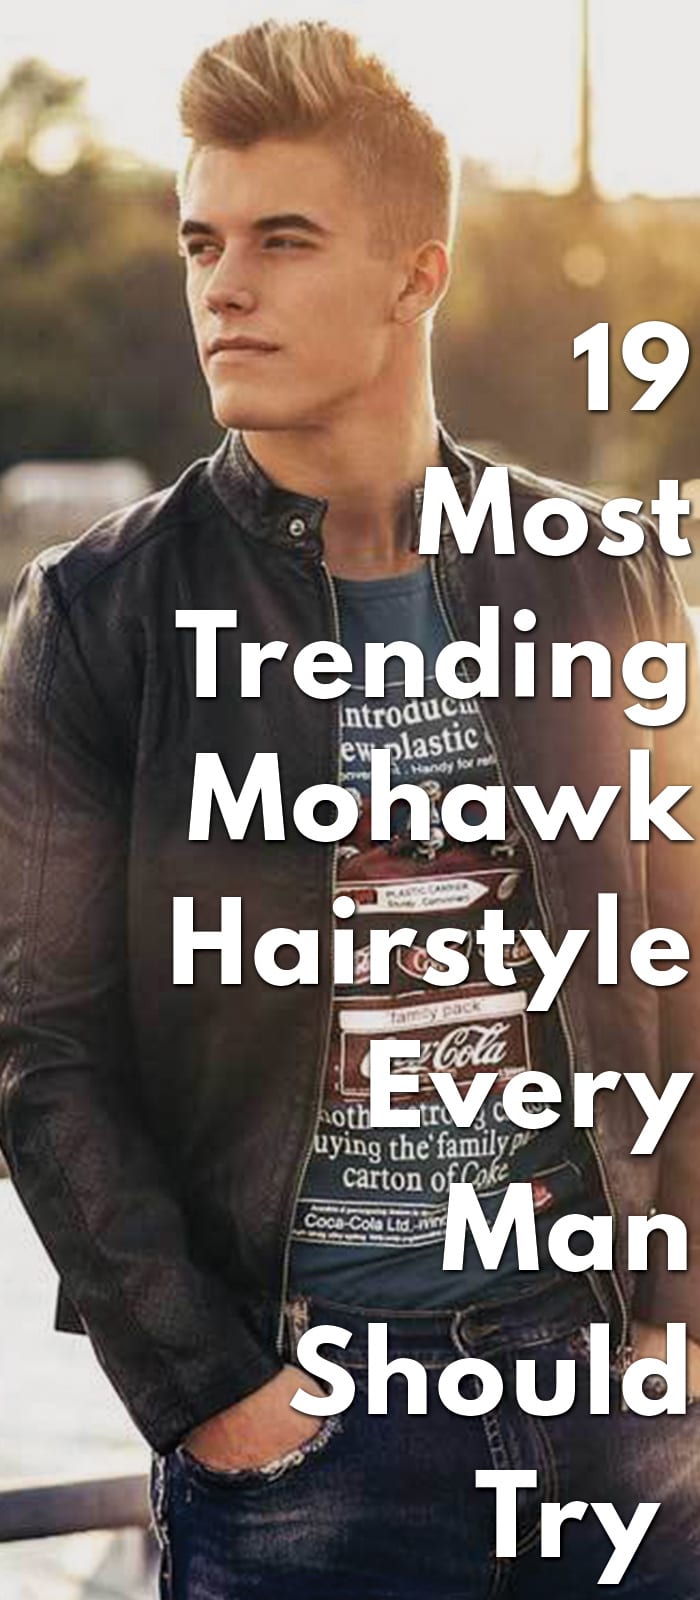 19-Most-Trending-Mohawk-Hairstyle-Every-Man-Should-Try